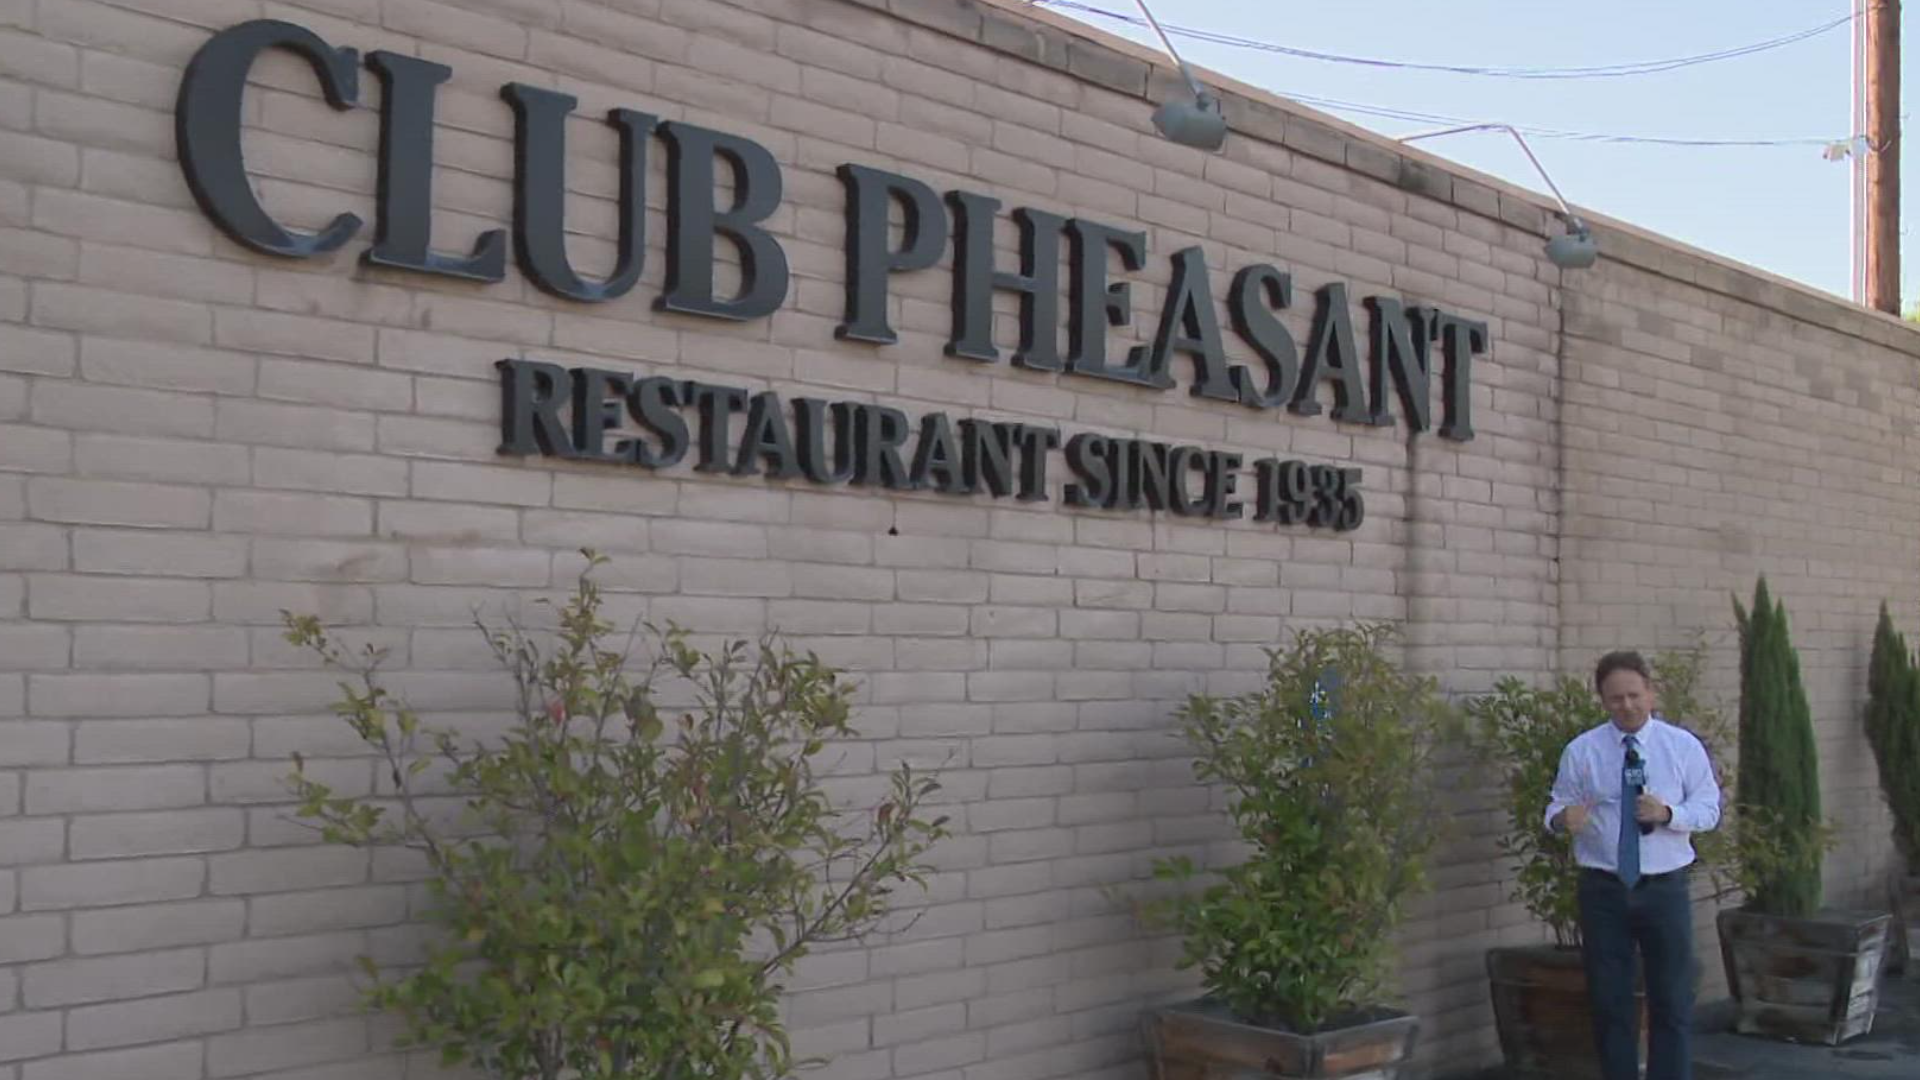 After 87 years, an iconic family-owned restaurant in West Sacramento, Club Pheasant, has been sold and is slated to be demolished next year.